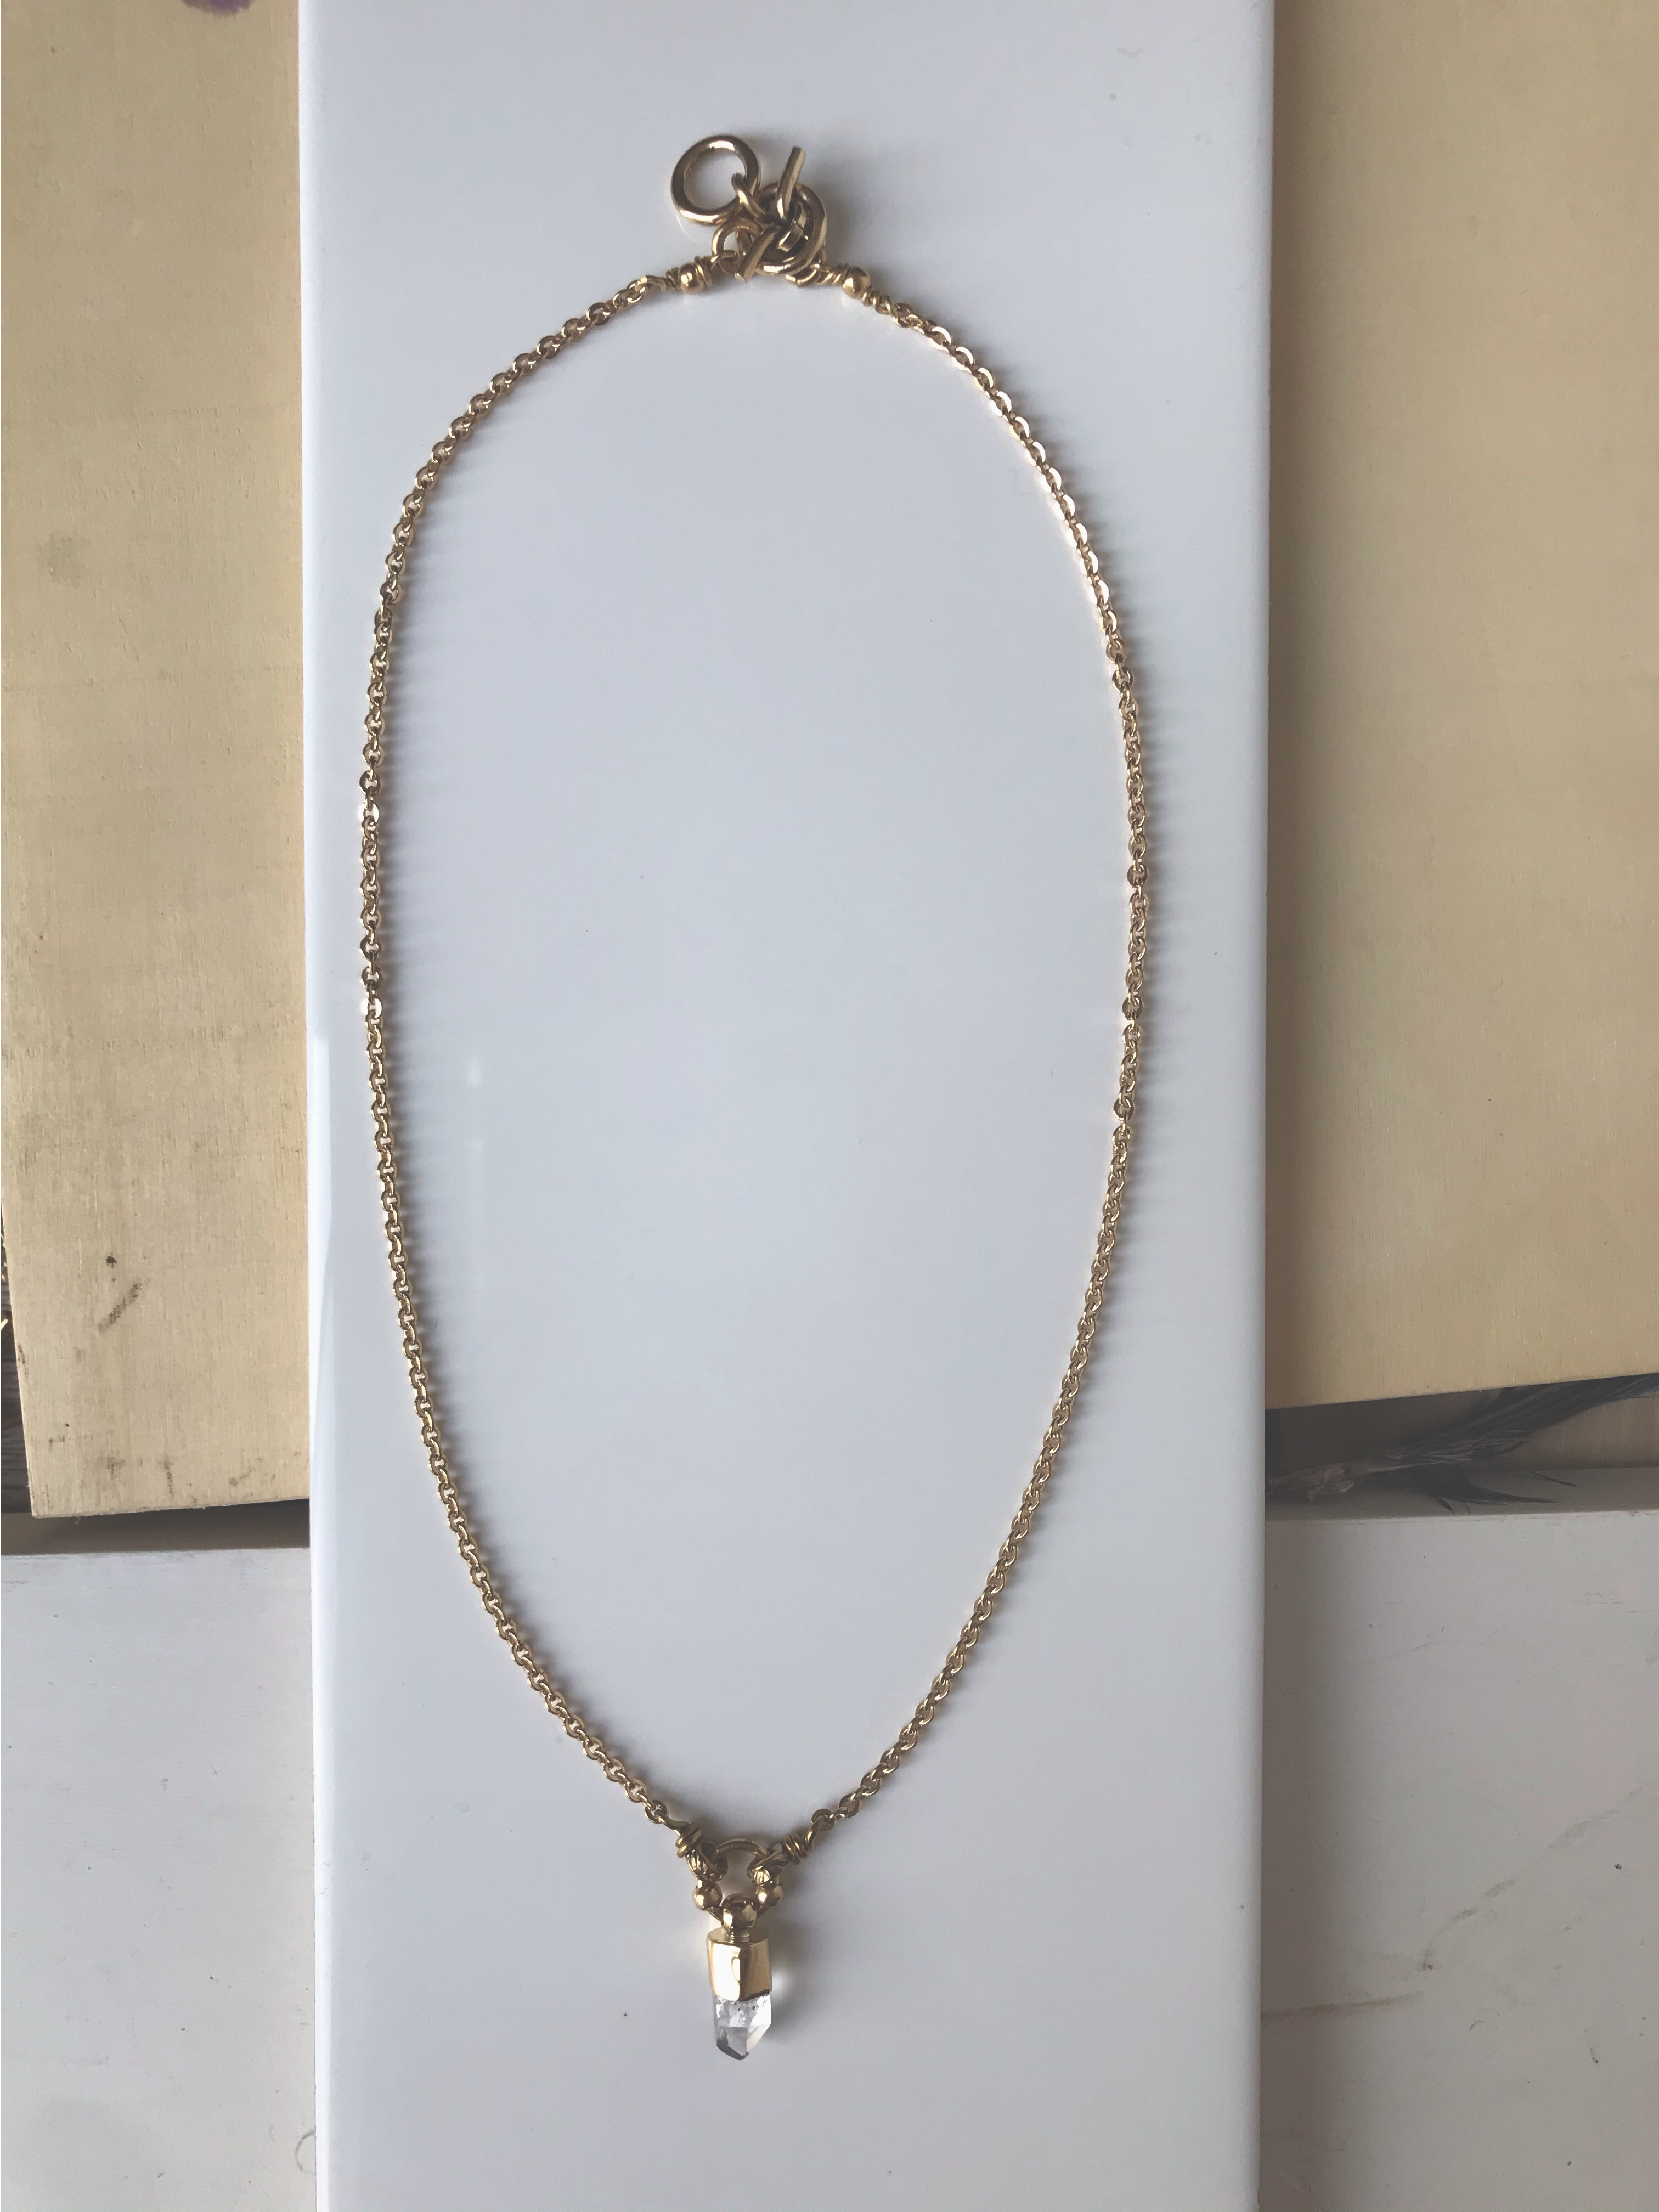 Centerpoint necklace